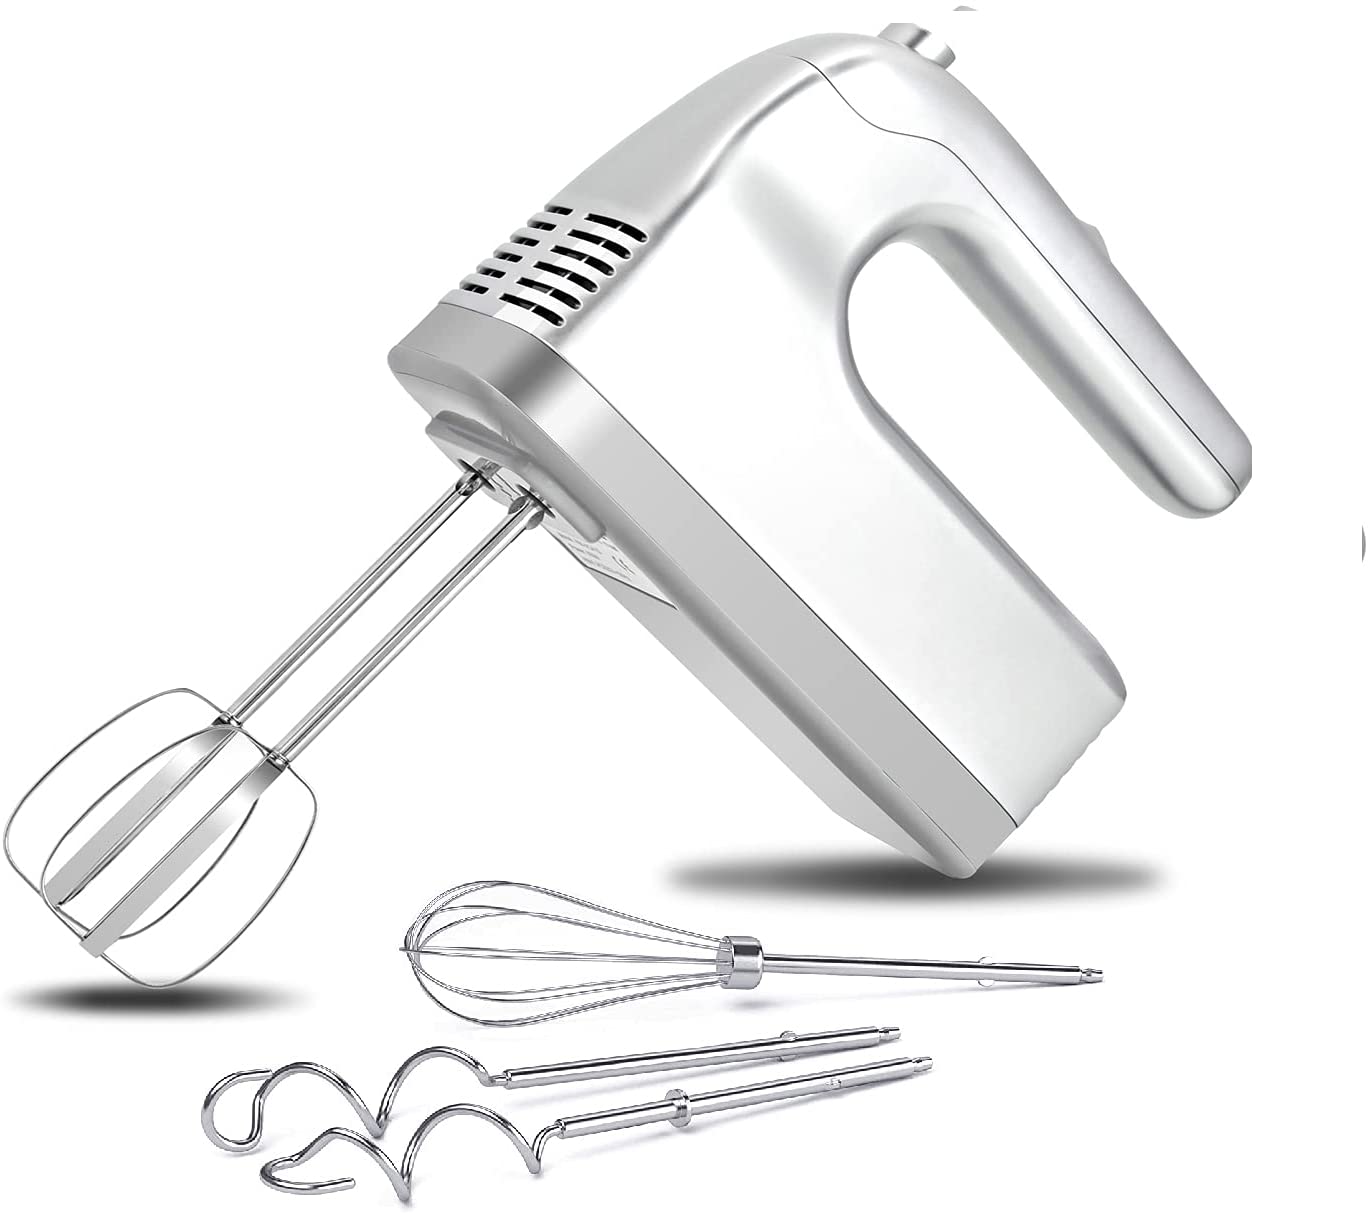 I00000 Hand Blender Electric Whisk with Turbo Button and Timer, 5 Speeds, Hand Blender with 6 Stainless Steel Attachments and Storage Case, Powerful 400W (Silver)